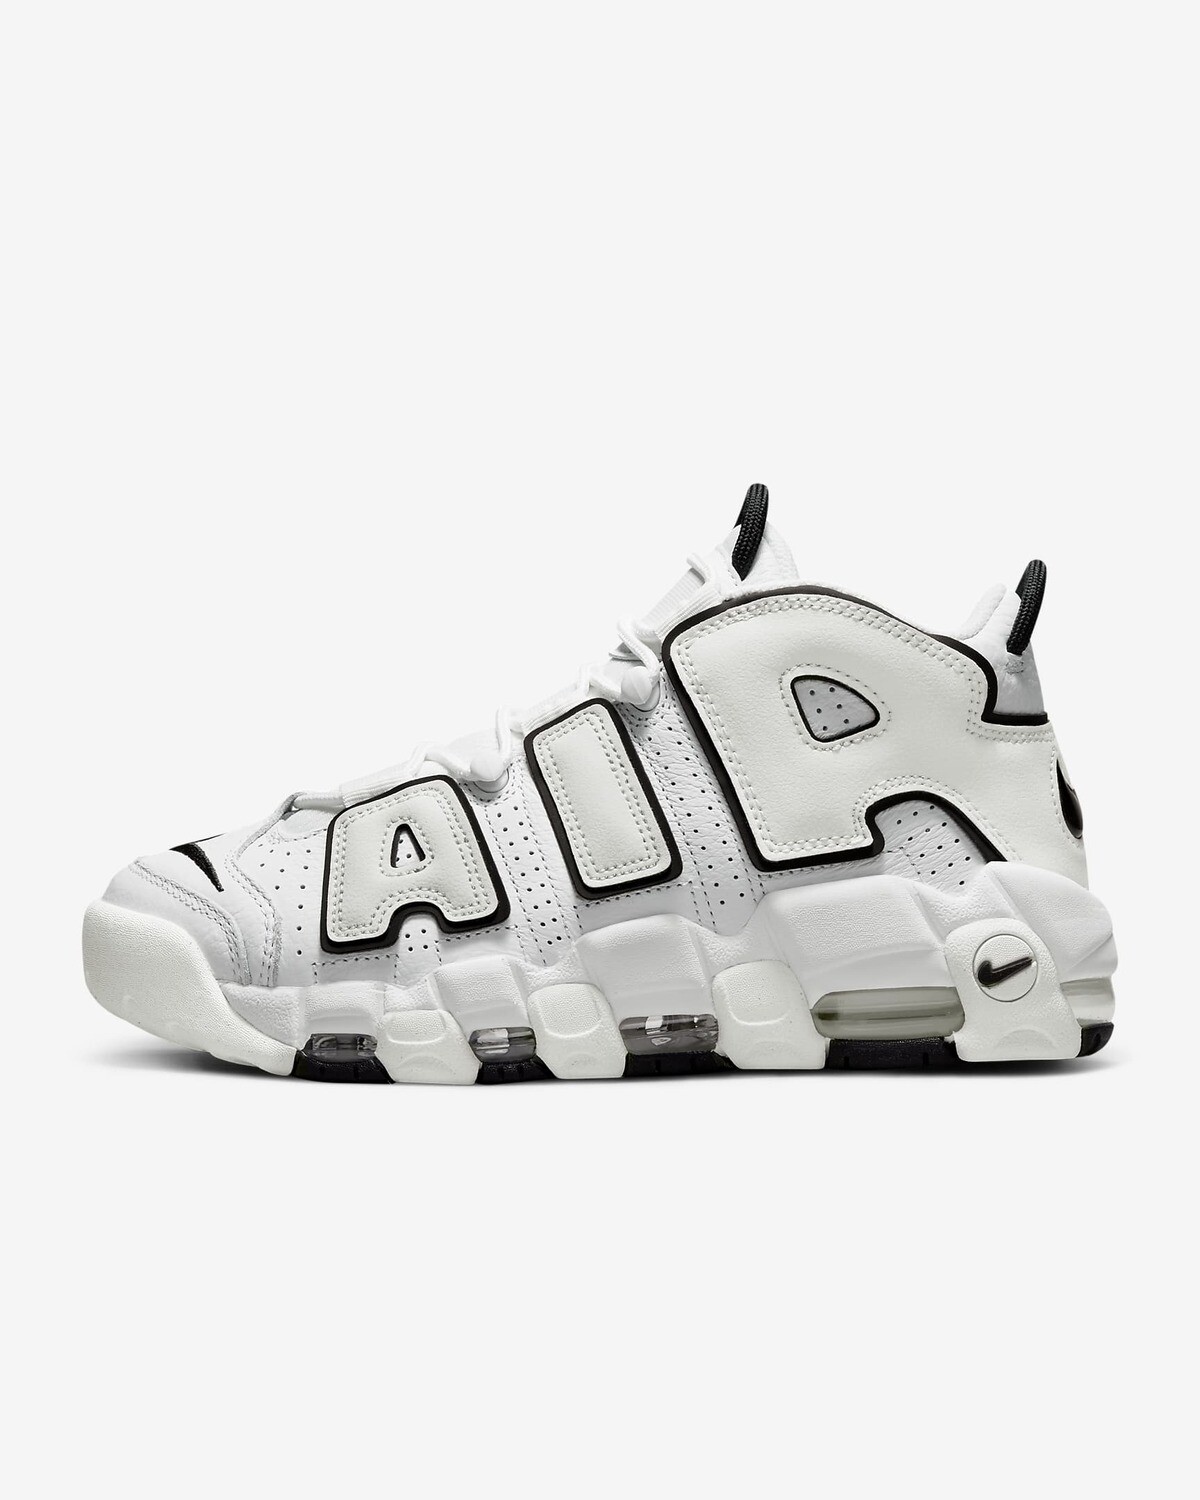 Nike AirMore Uptempo '96 bianche Summit White Bianco sneakers air Uomo art. DO6718 100